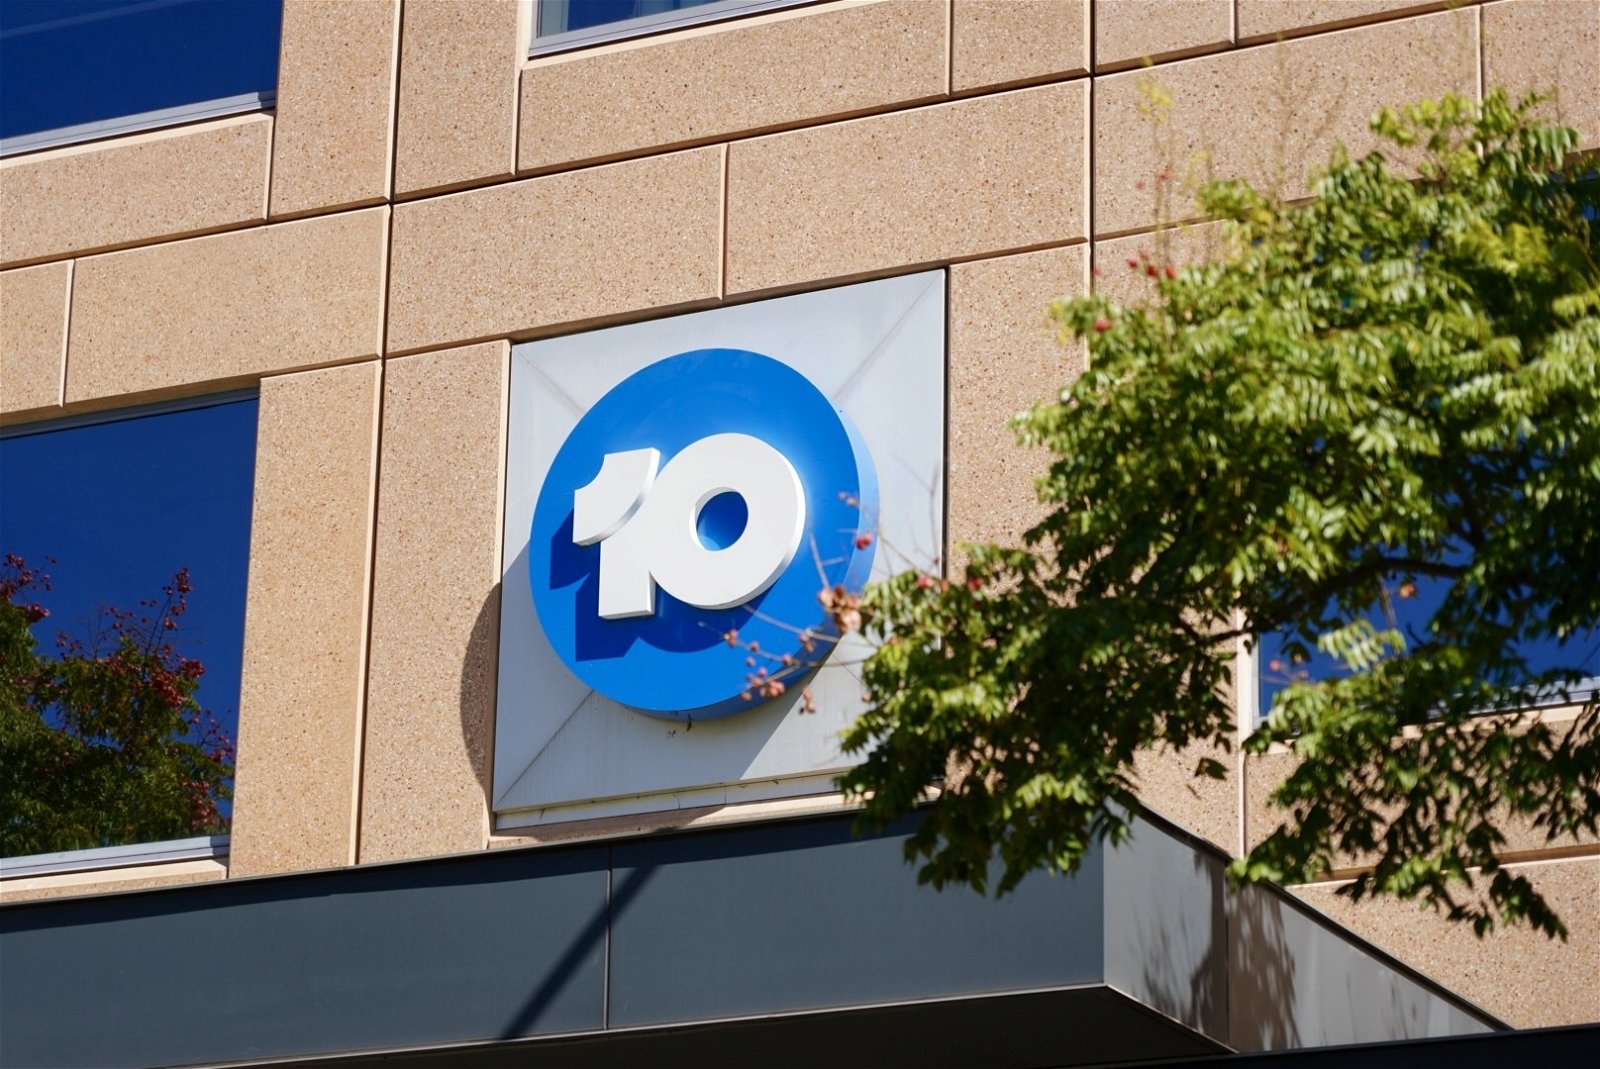 Network 10 sign on building